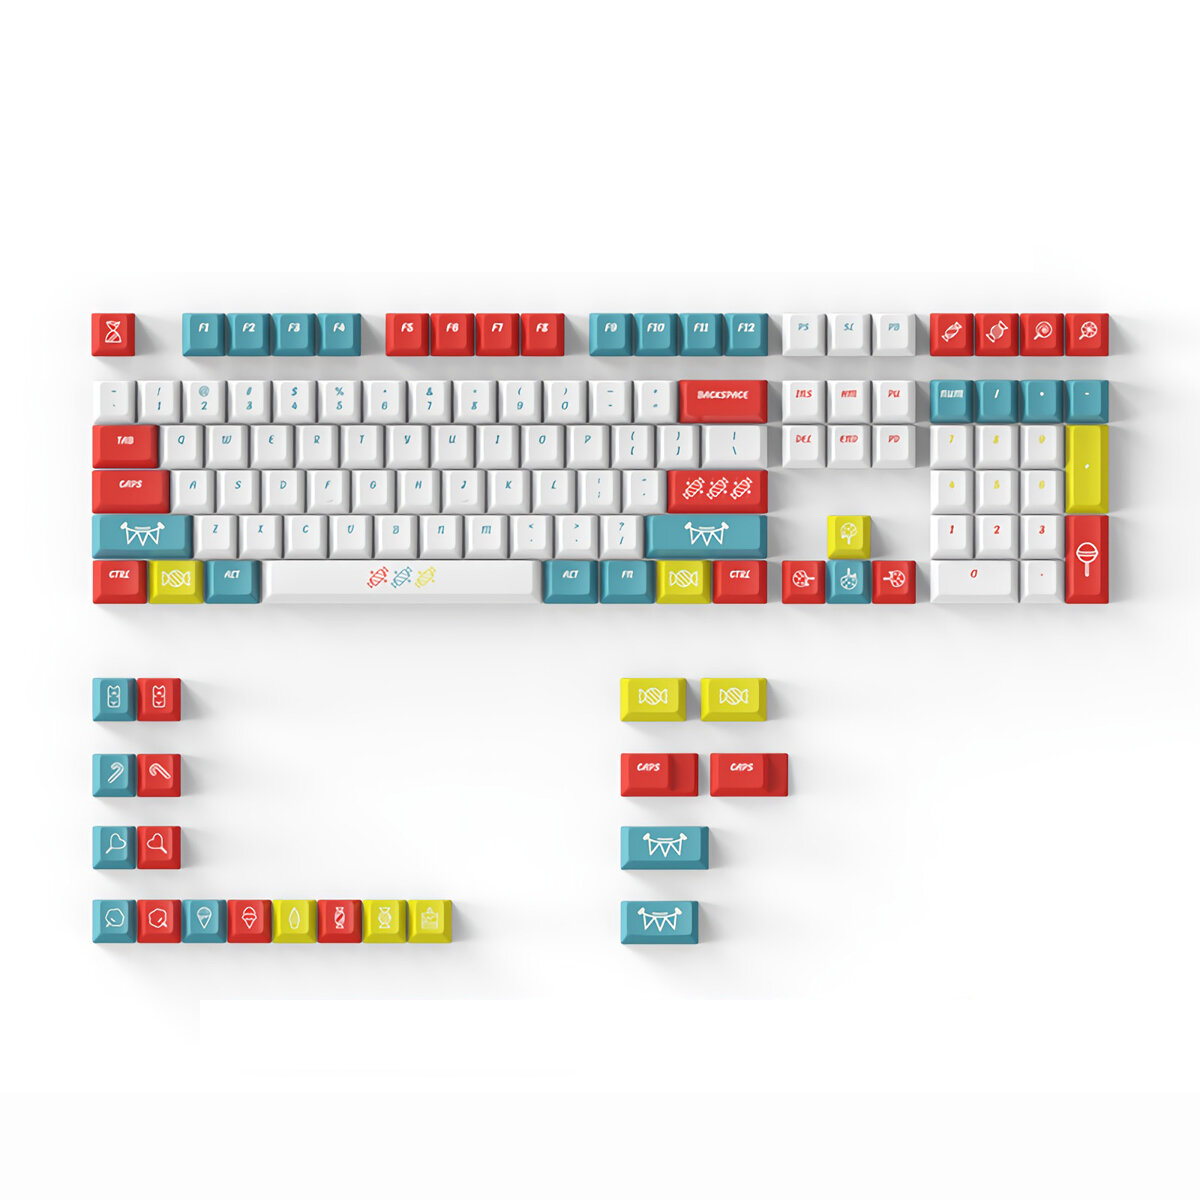 

DAGK 128/129 Keys Toffee Patch Keycap Set Cherry/XDA Profile PBT Sublimation Keycaps for Mechanical Keyboards